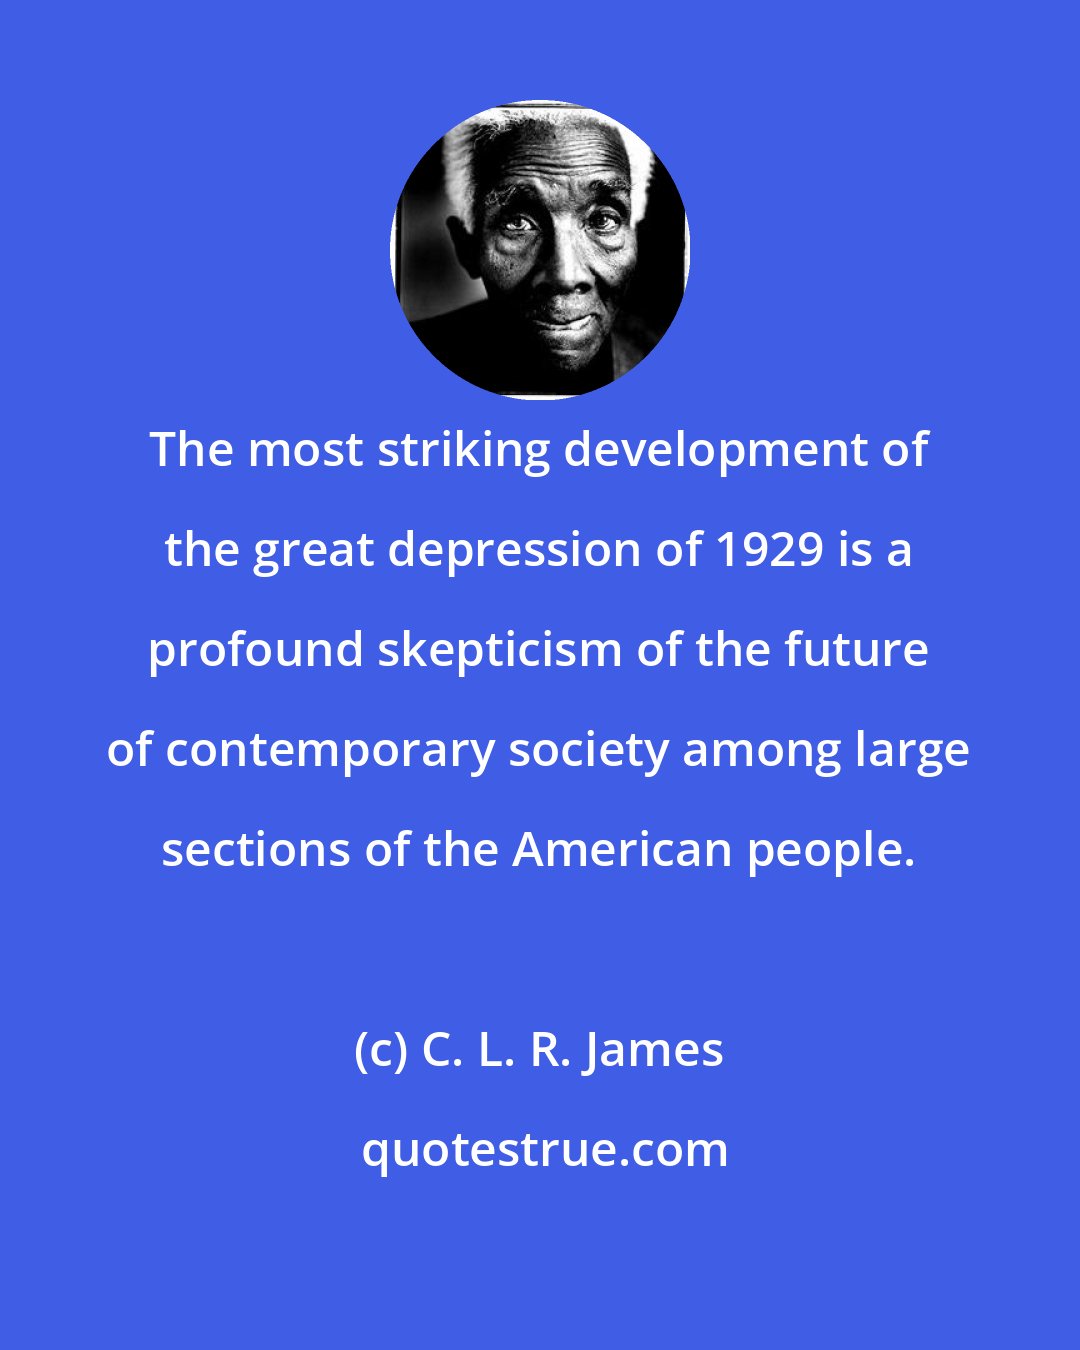 C. L. R. James: The most striking development of the great depression of 1929 is a profound skepticism of the future of contemporary society among large sections of the American people.